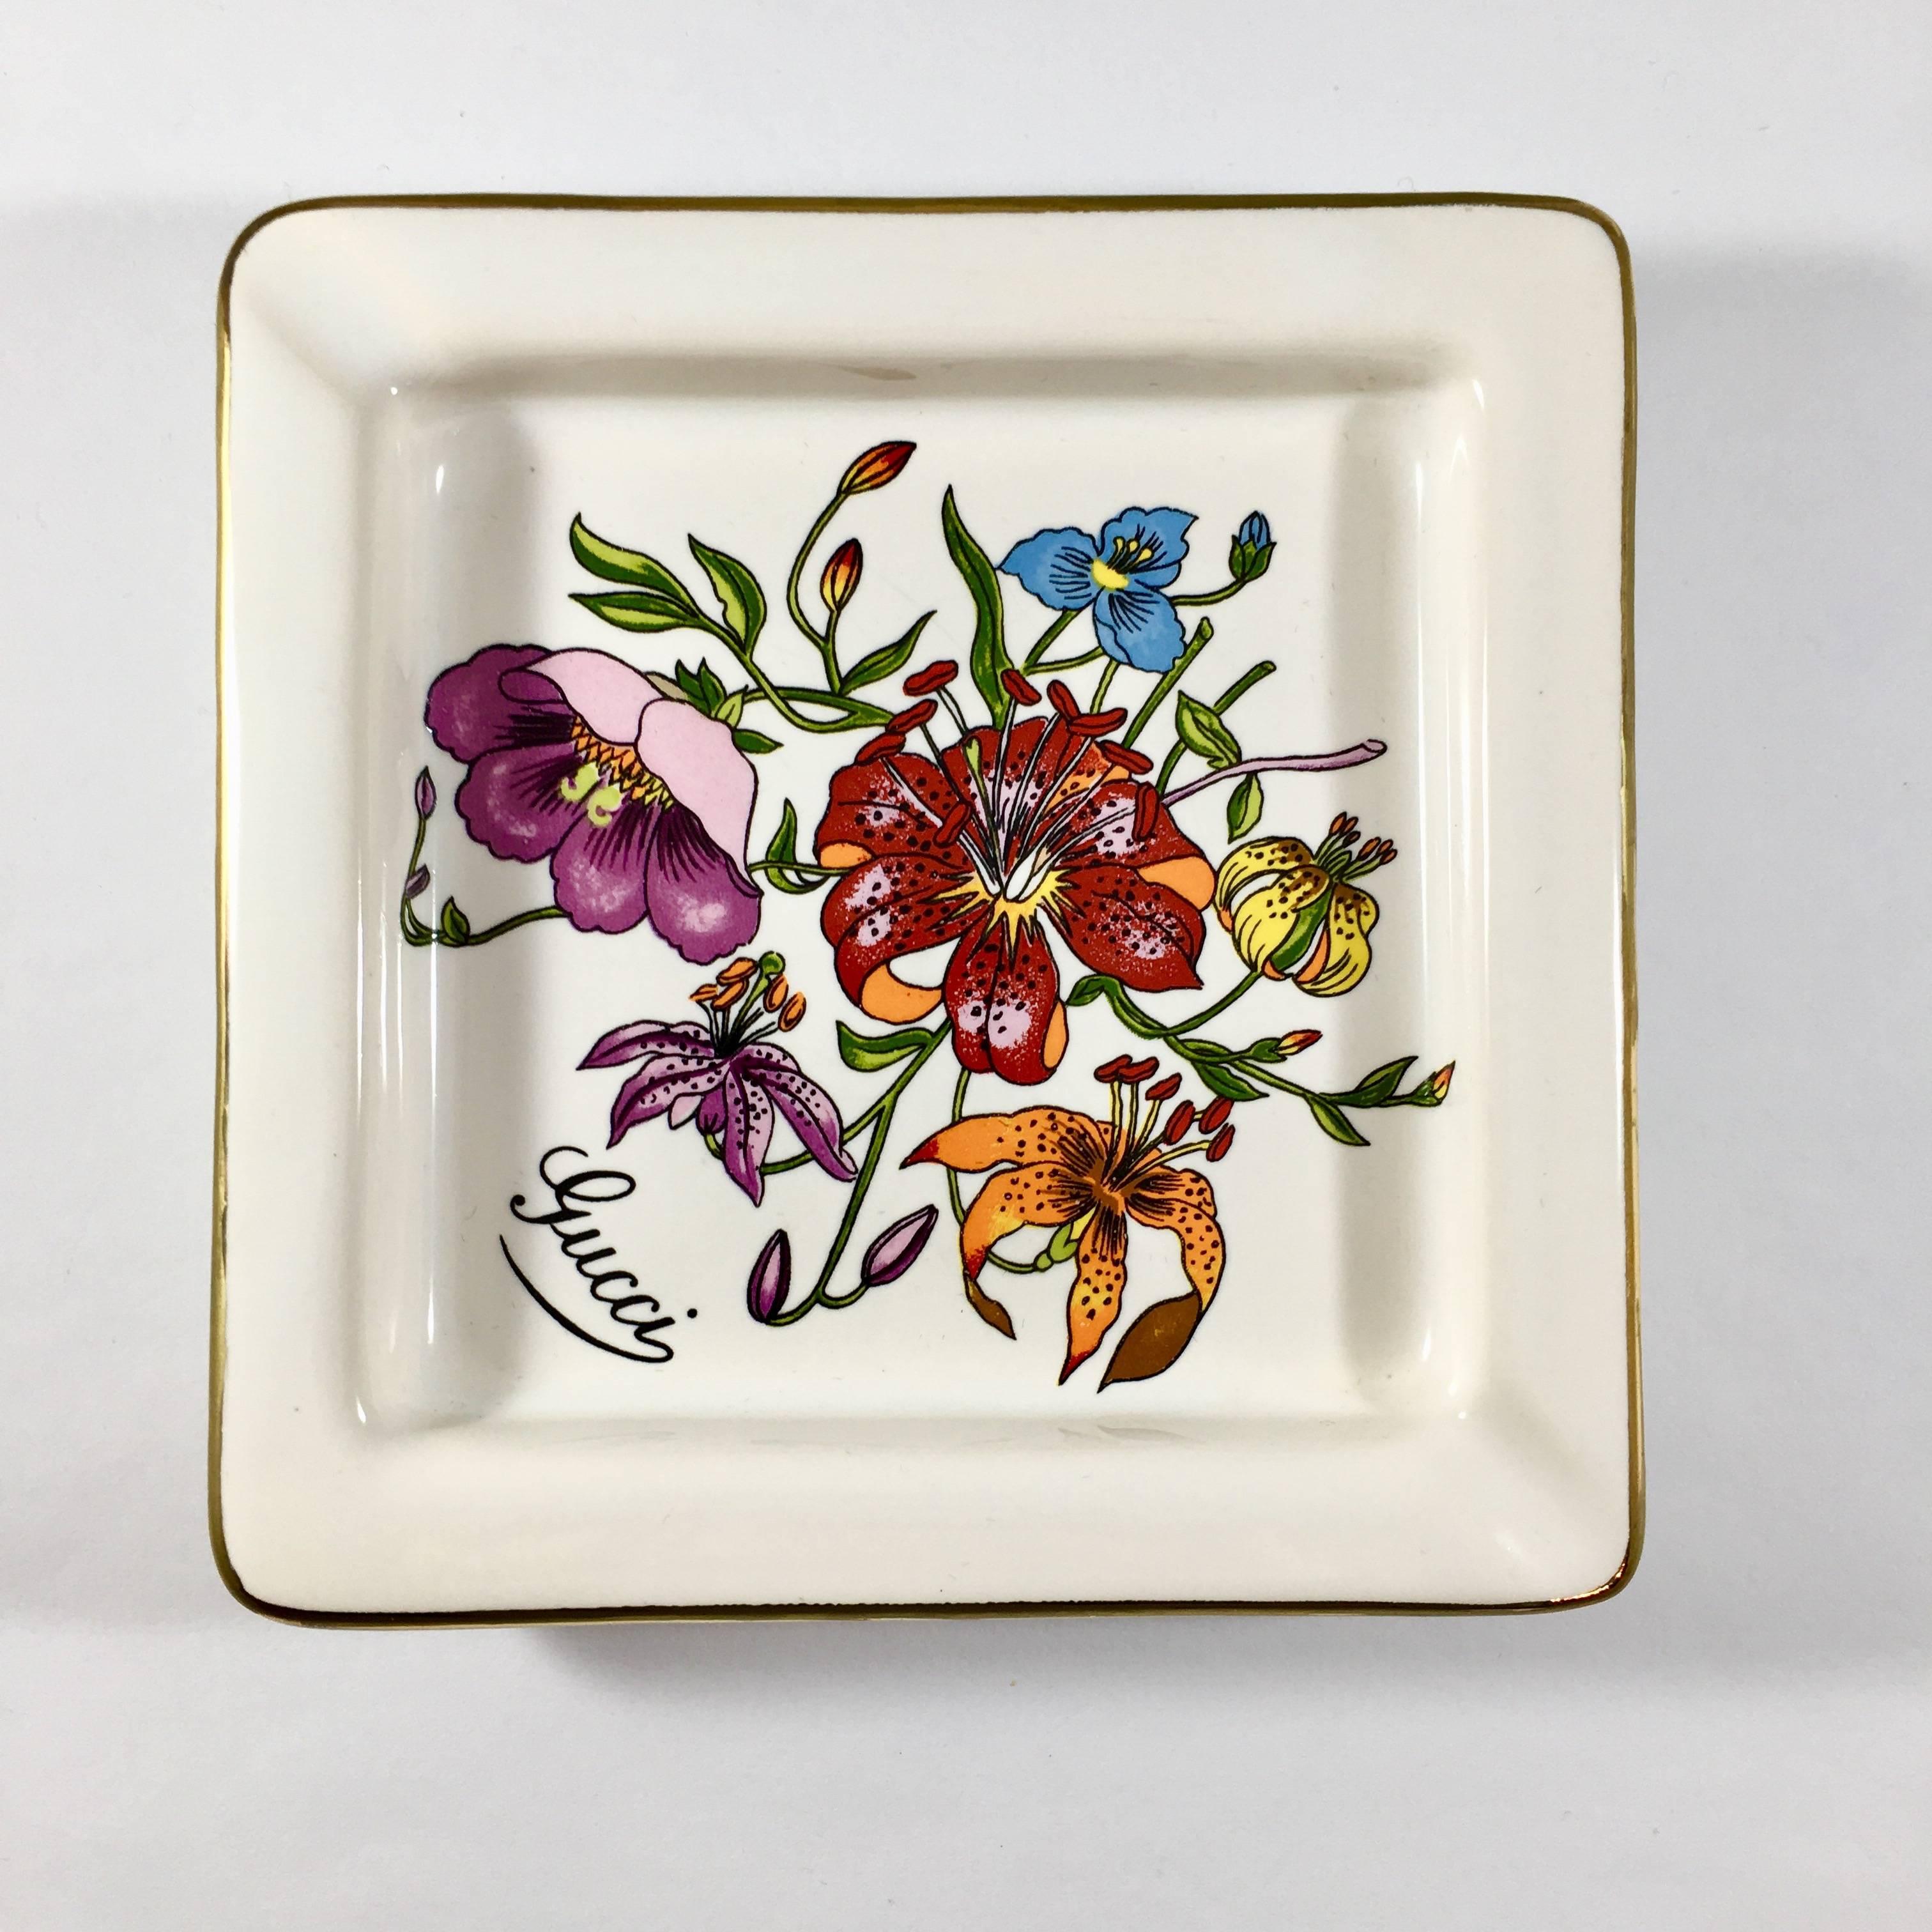 This is a vintage 1970s Gucci ashtray which can also be used as a jewelry or trinket dish. It is printed with the signature Gucci Accornero floral print and measures 5 inches x 5 inches square. It has a painted gold border around the edge and is